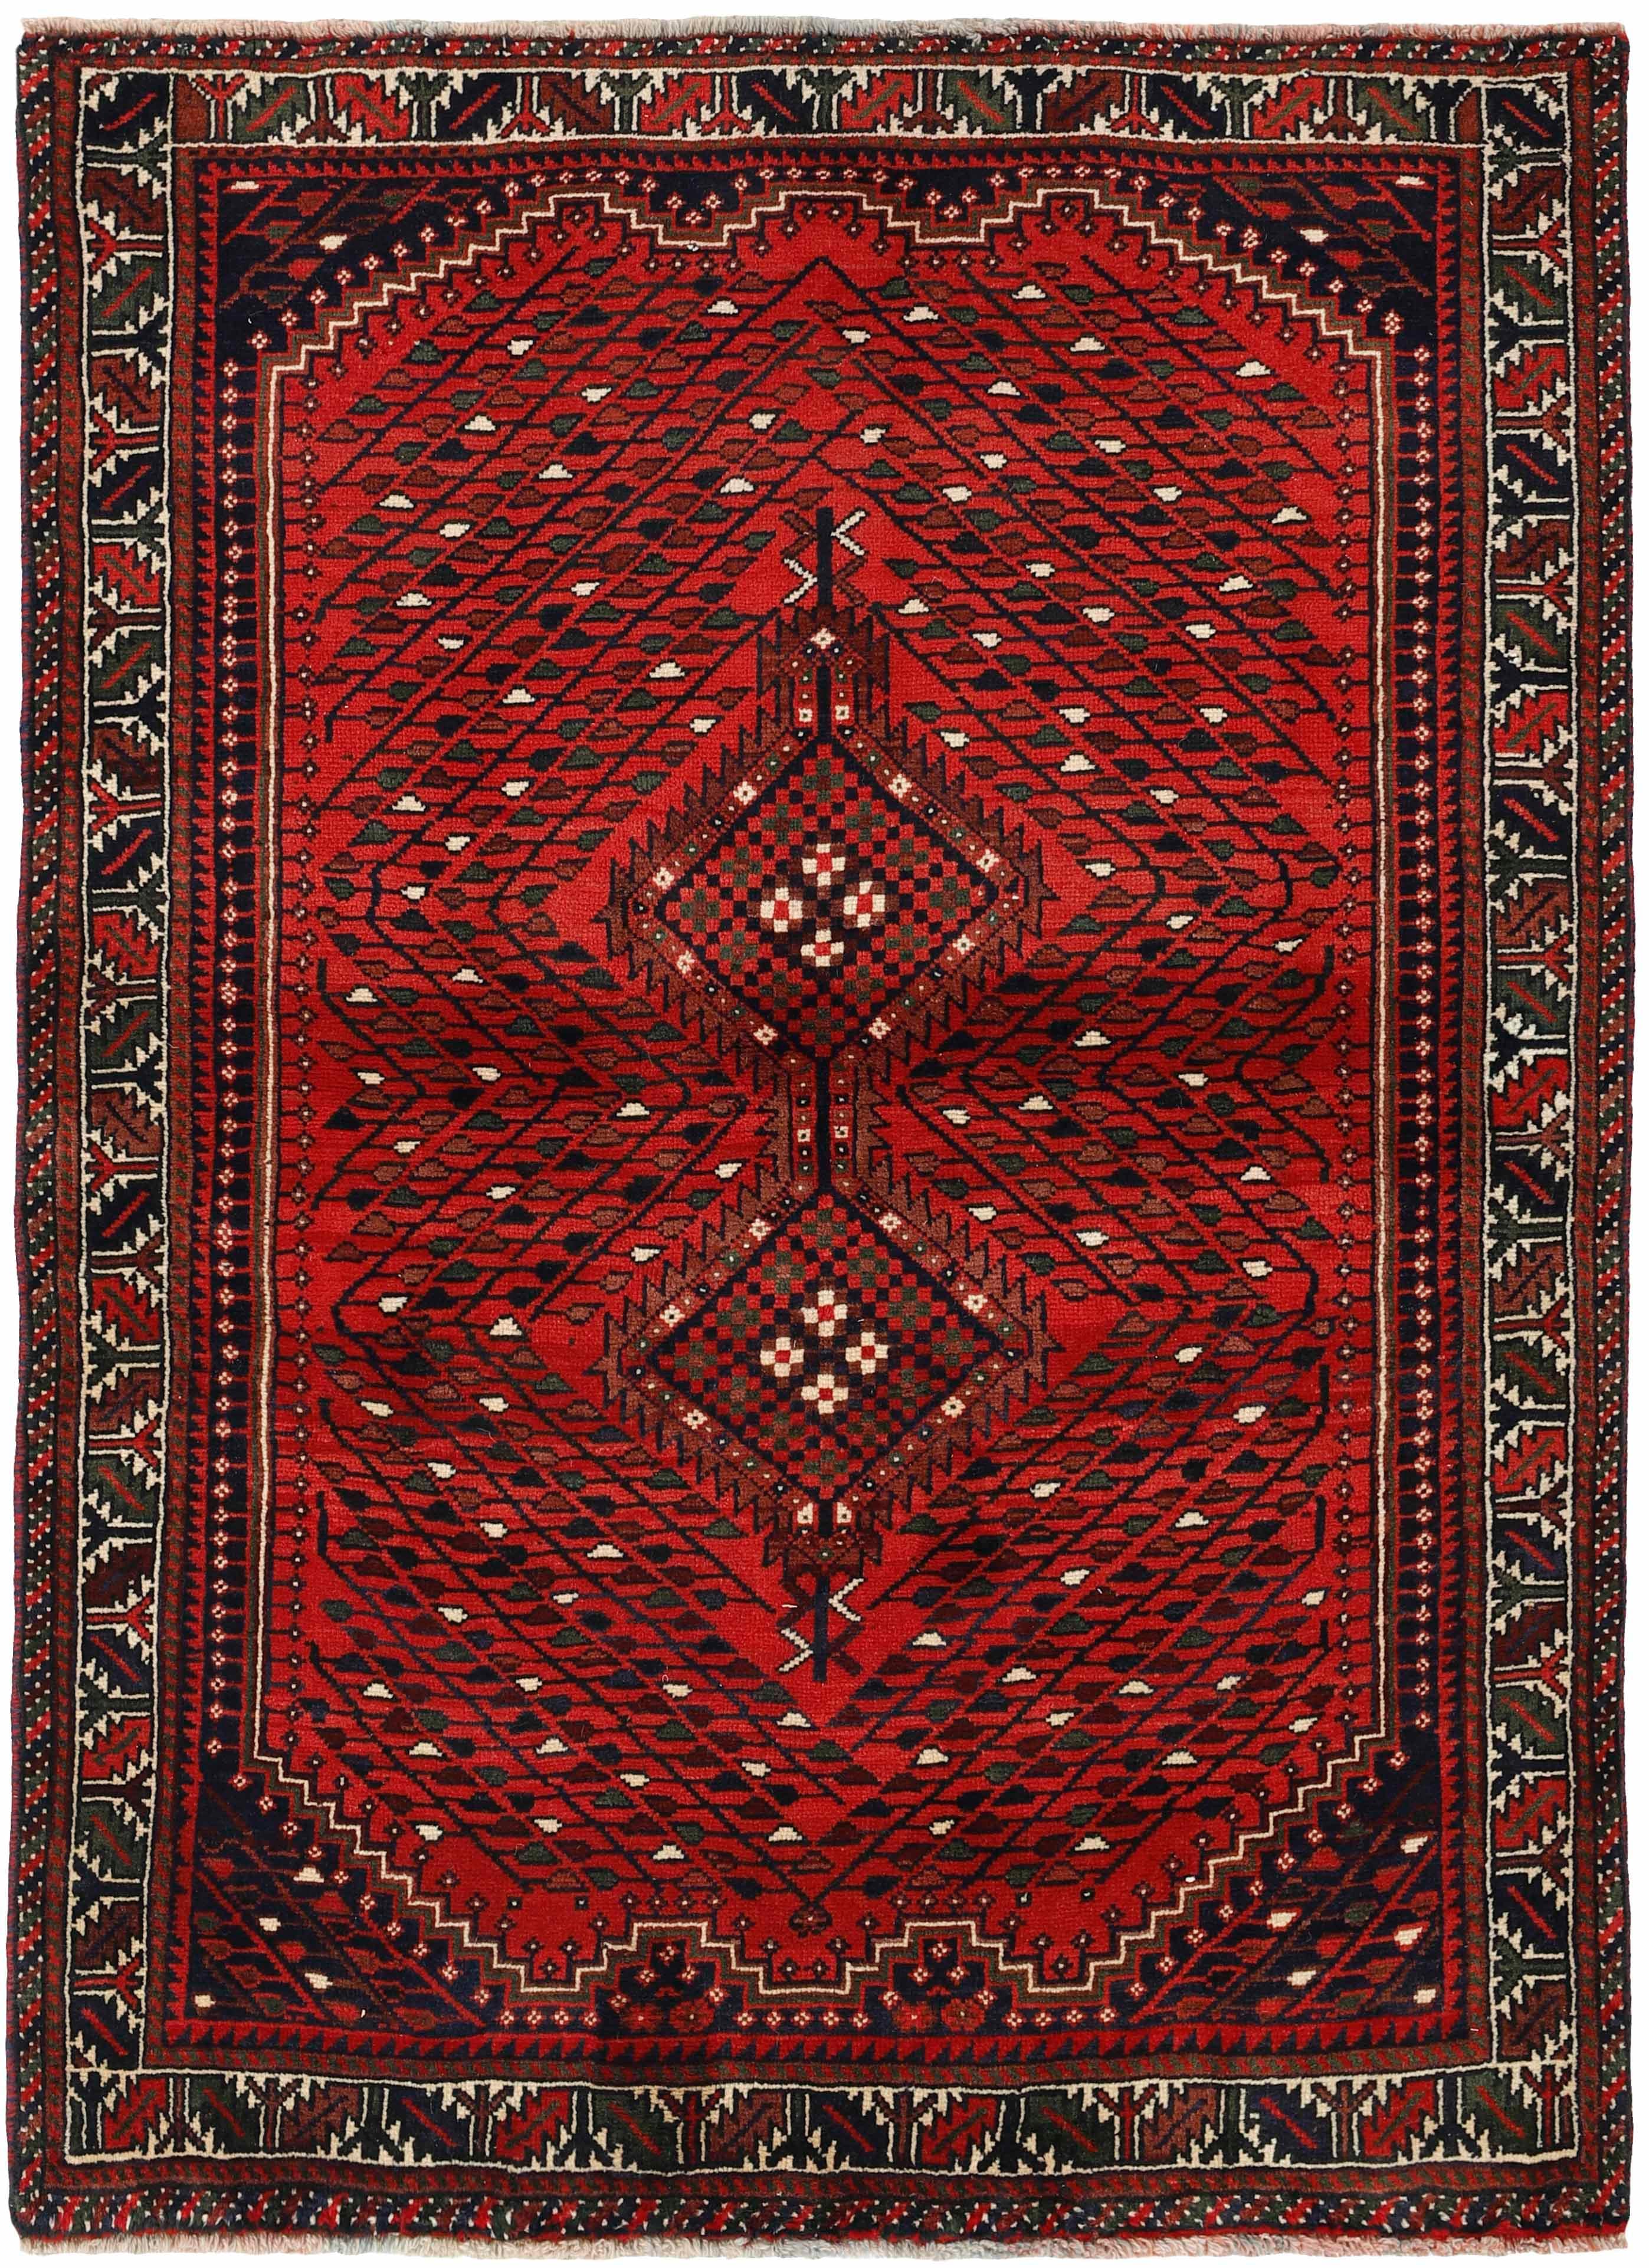 Authentic persian rug with a traditional tribal geometric pattern in red, black and ivory